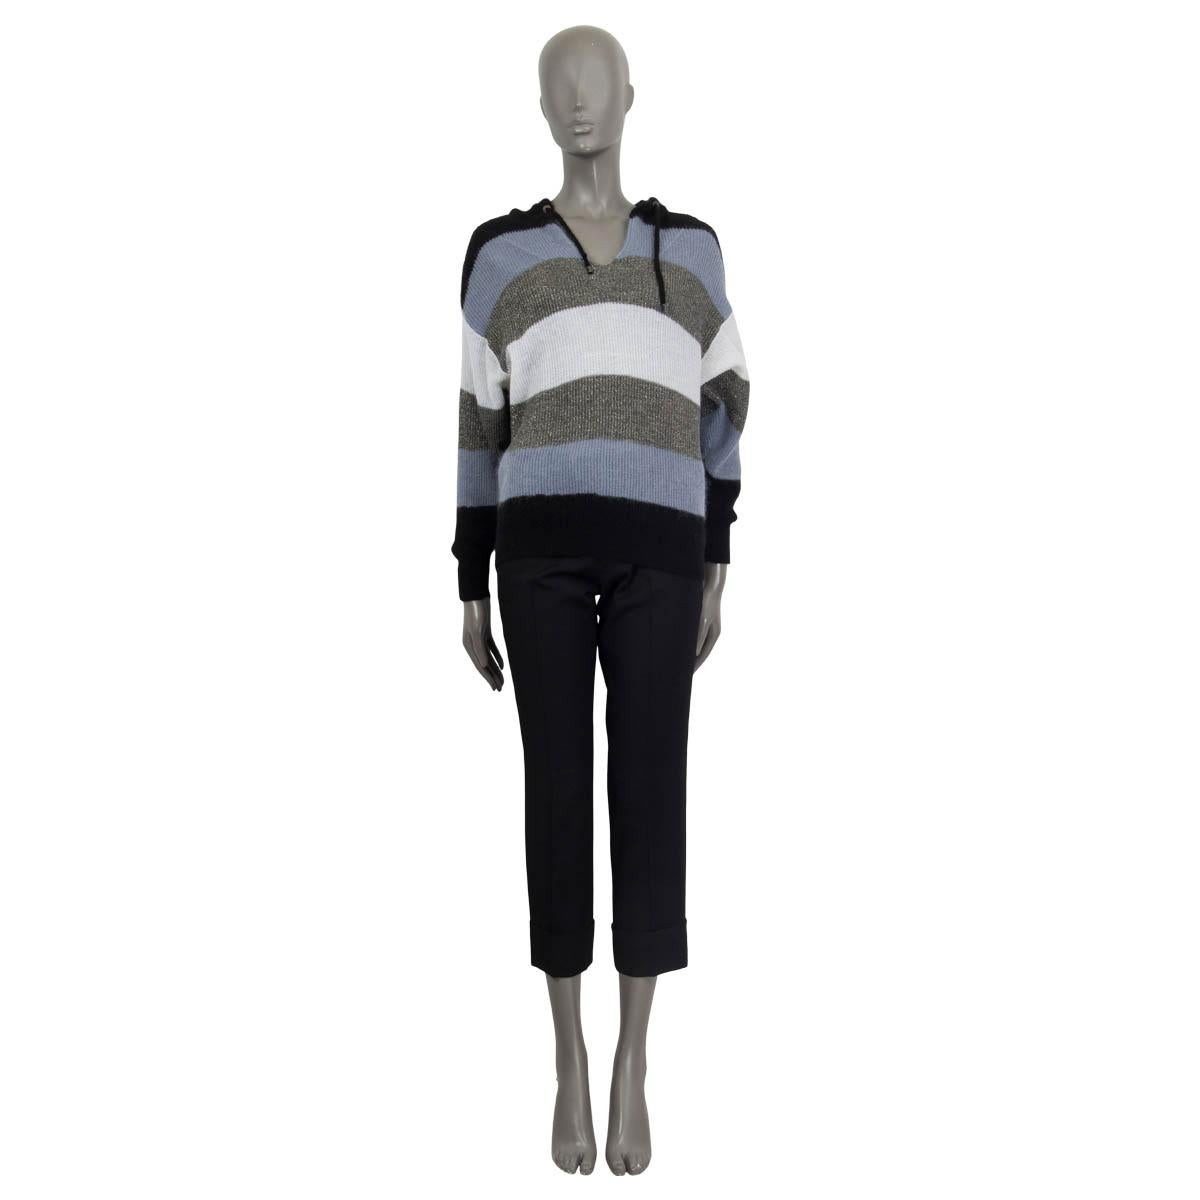 100% authentic Brunello Cucinelli striped hooded sweater in black, blue, white, gray and silver polyamide (47%), mohair (37%) and wool (16%). Unlined. Has been worn and is in excellent condition.

Measurements
Tag Size	XS
Size	XS
Shoulder Width	57cm